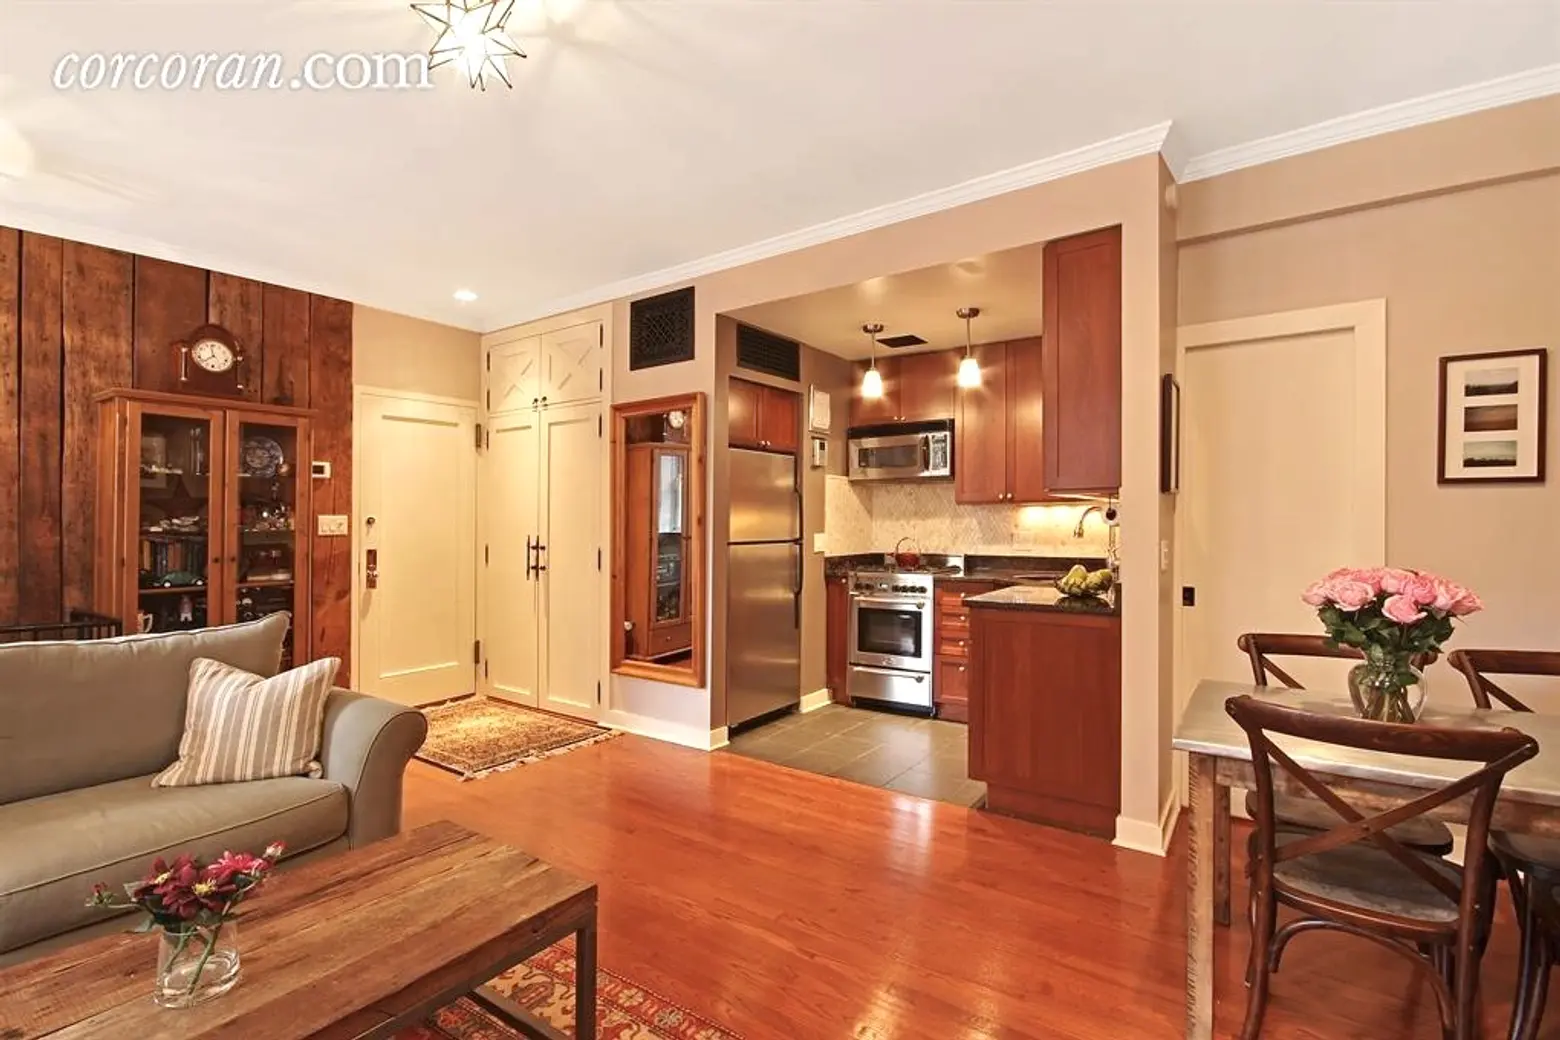 337 West 20th Street, muffin house, one-bedroom co-op, chelsea, kitchen, living room 